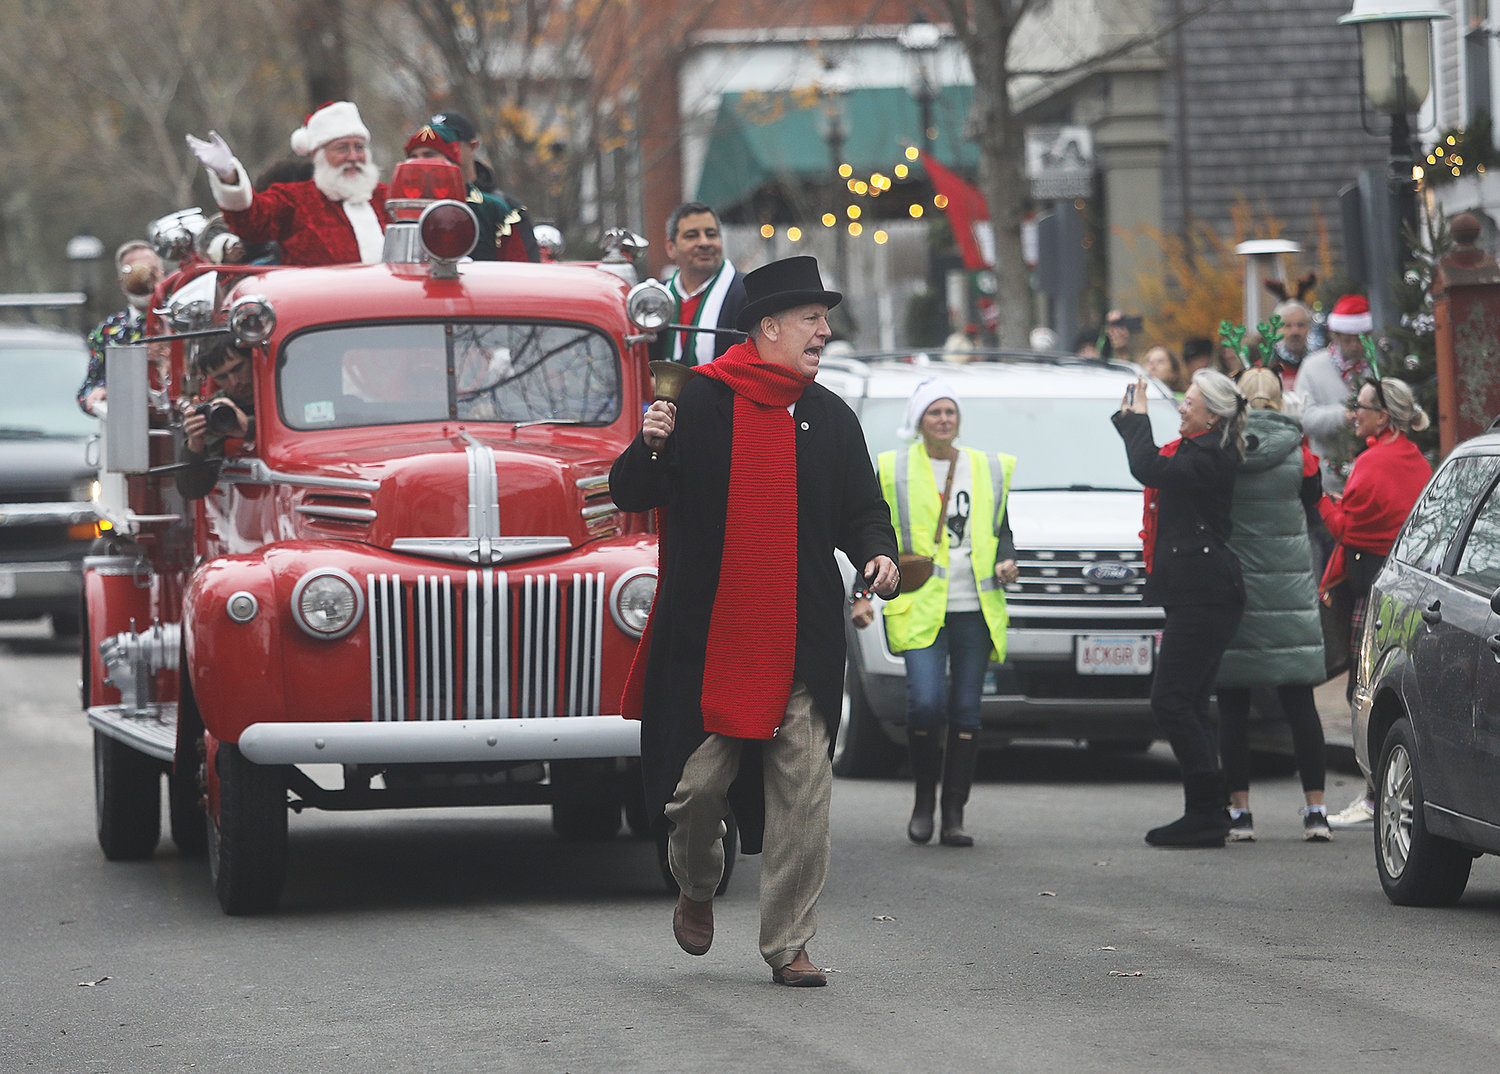 DECEMBER 3, 2022 -- Town Crier Eric Goddard leads the Santa parade down Broad Street during Christmas Stroll. Photo by Ray K. Saunders